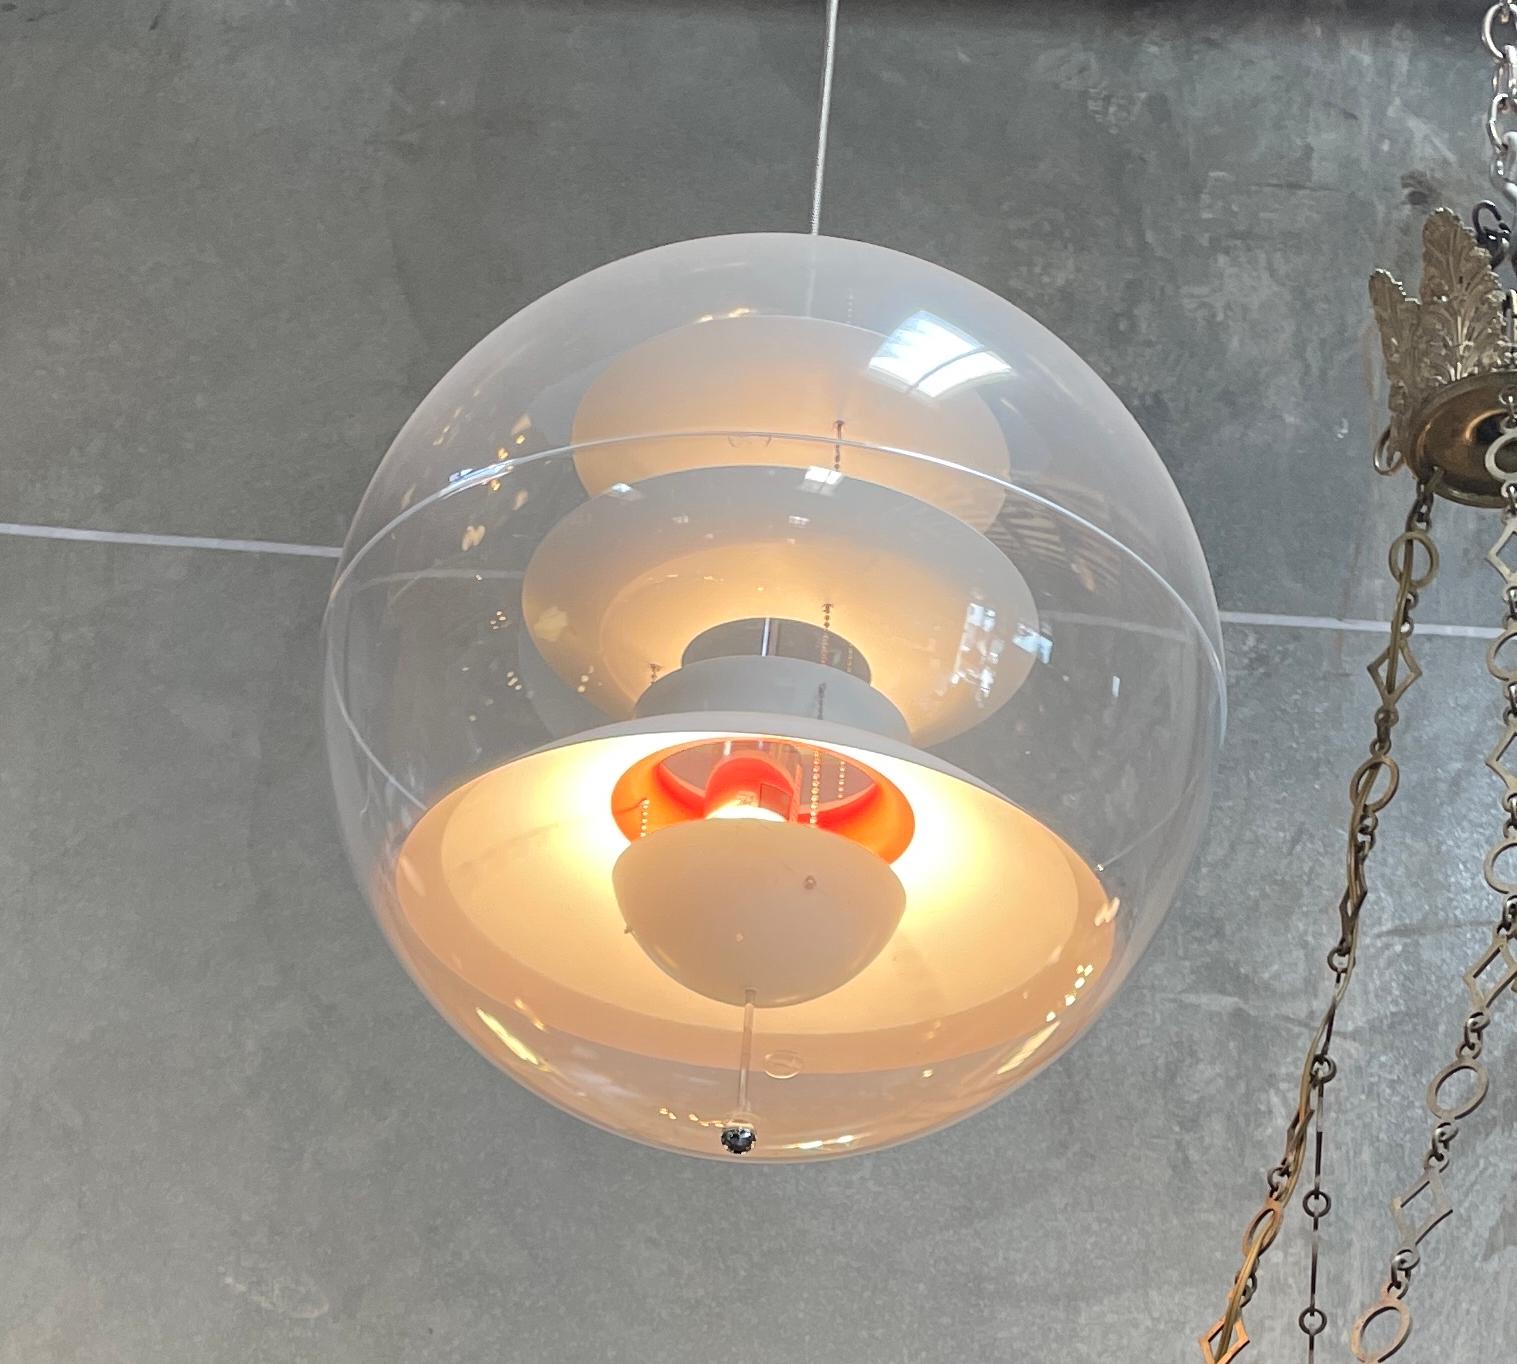 A recent production of Verner Panton's 1977 design, this pendant light comprises an acrylic transparent sphere and white aluminum reflectors with some red interior parts and emits a lovely, diffused light.  It is hung with a chrome ceiling canopy